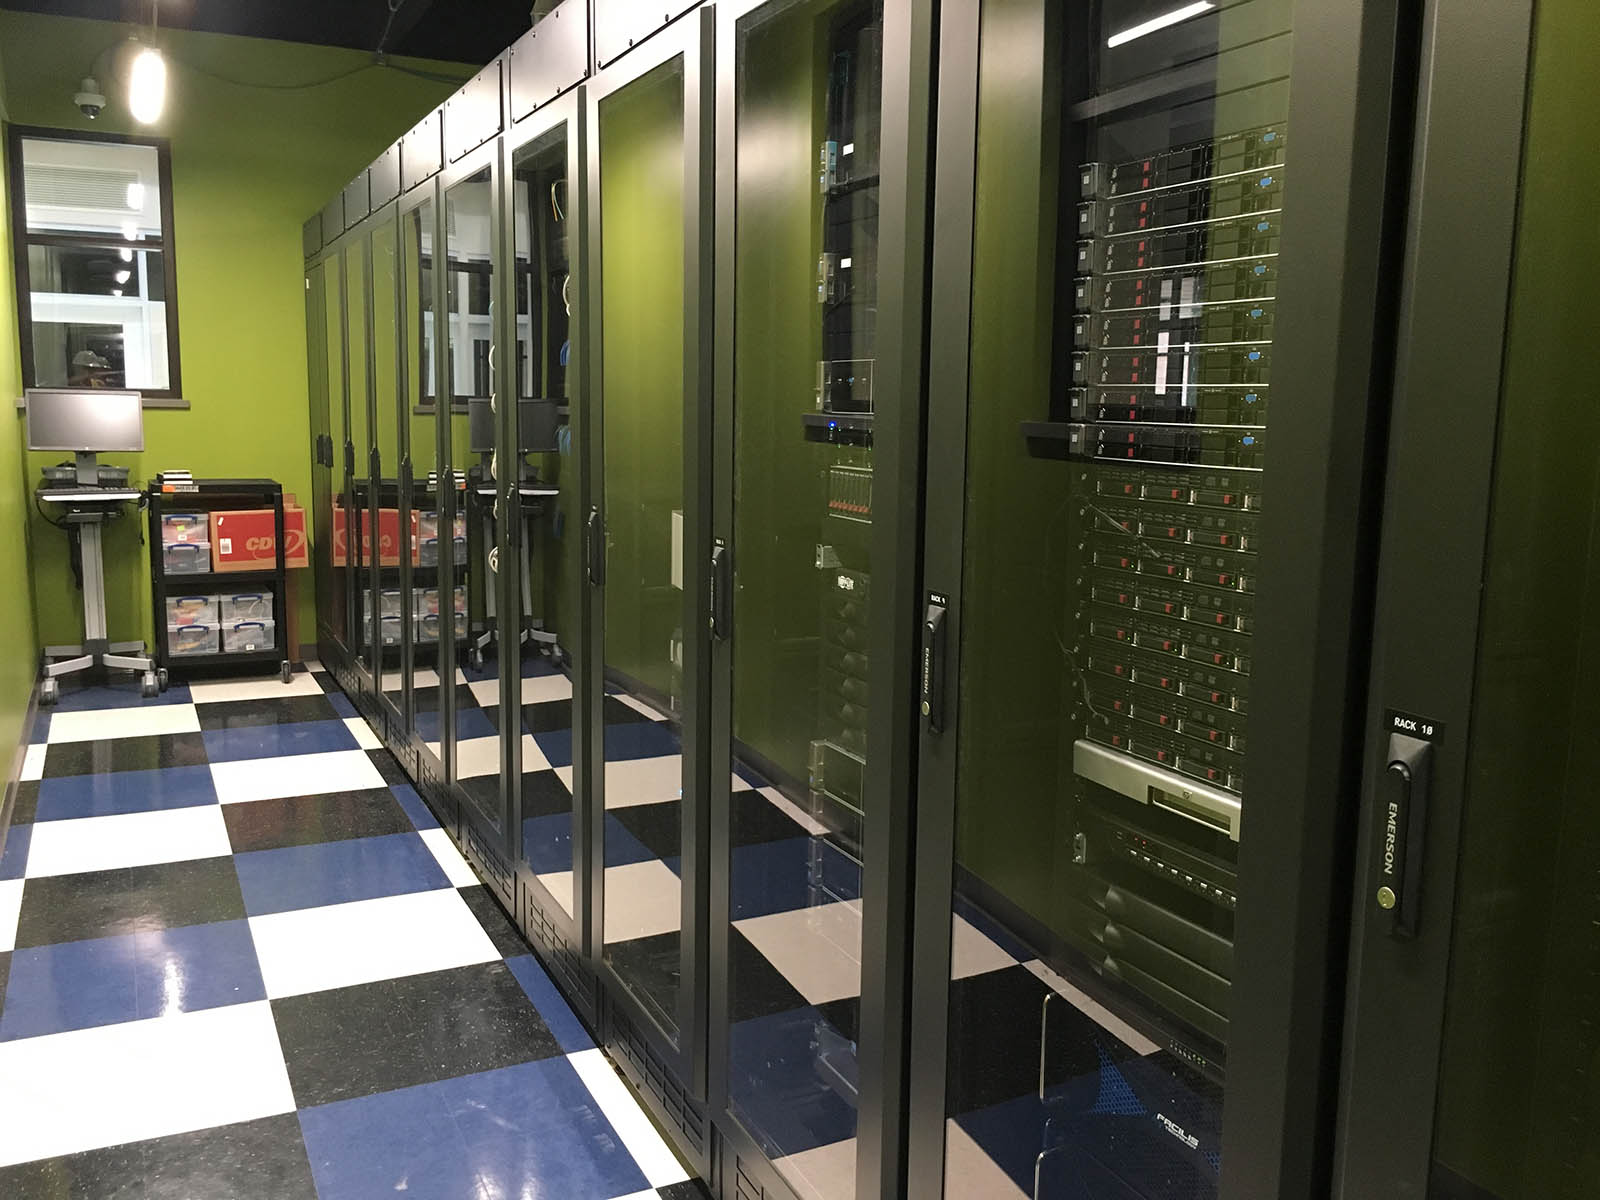 A large server and networking room filled with server enclosures with clear glass doors